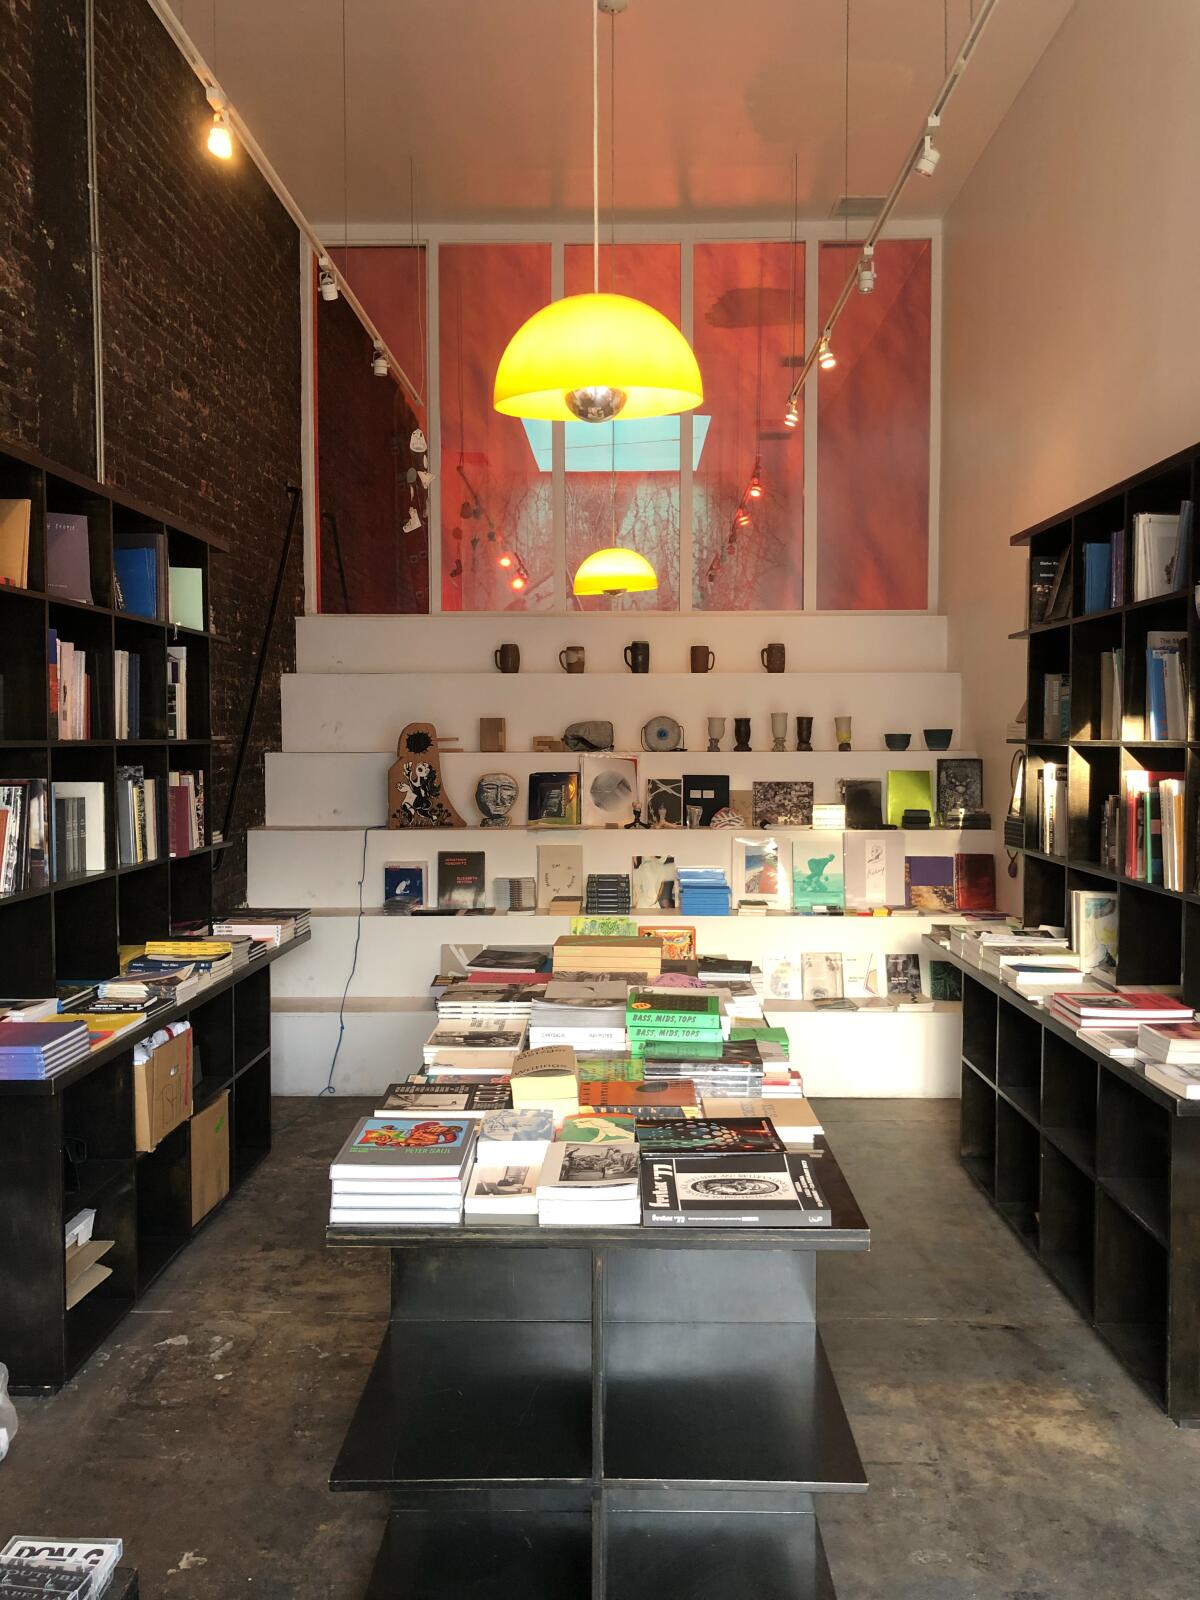 Interior of Family Books at 436 N. Fairfax Ave. in Los Angeles.